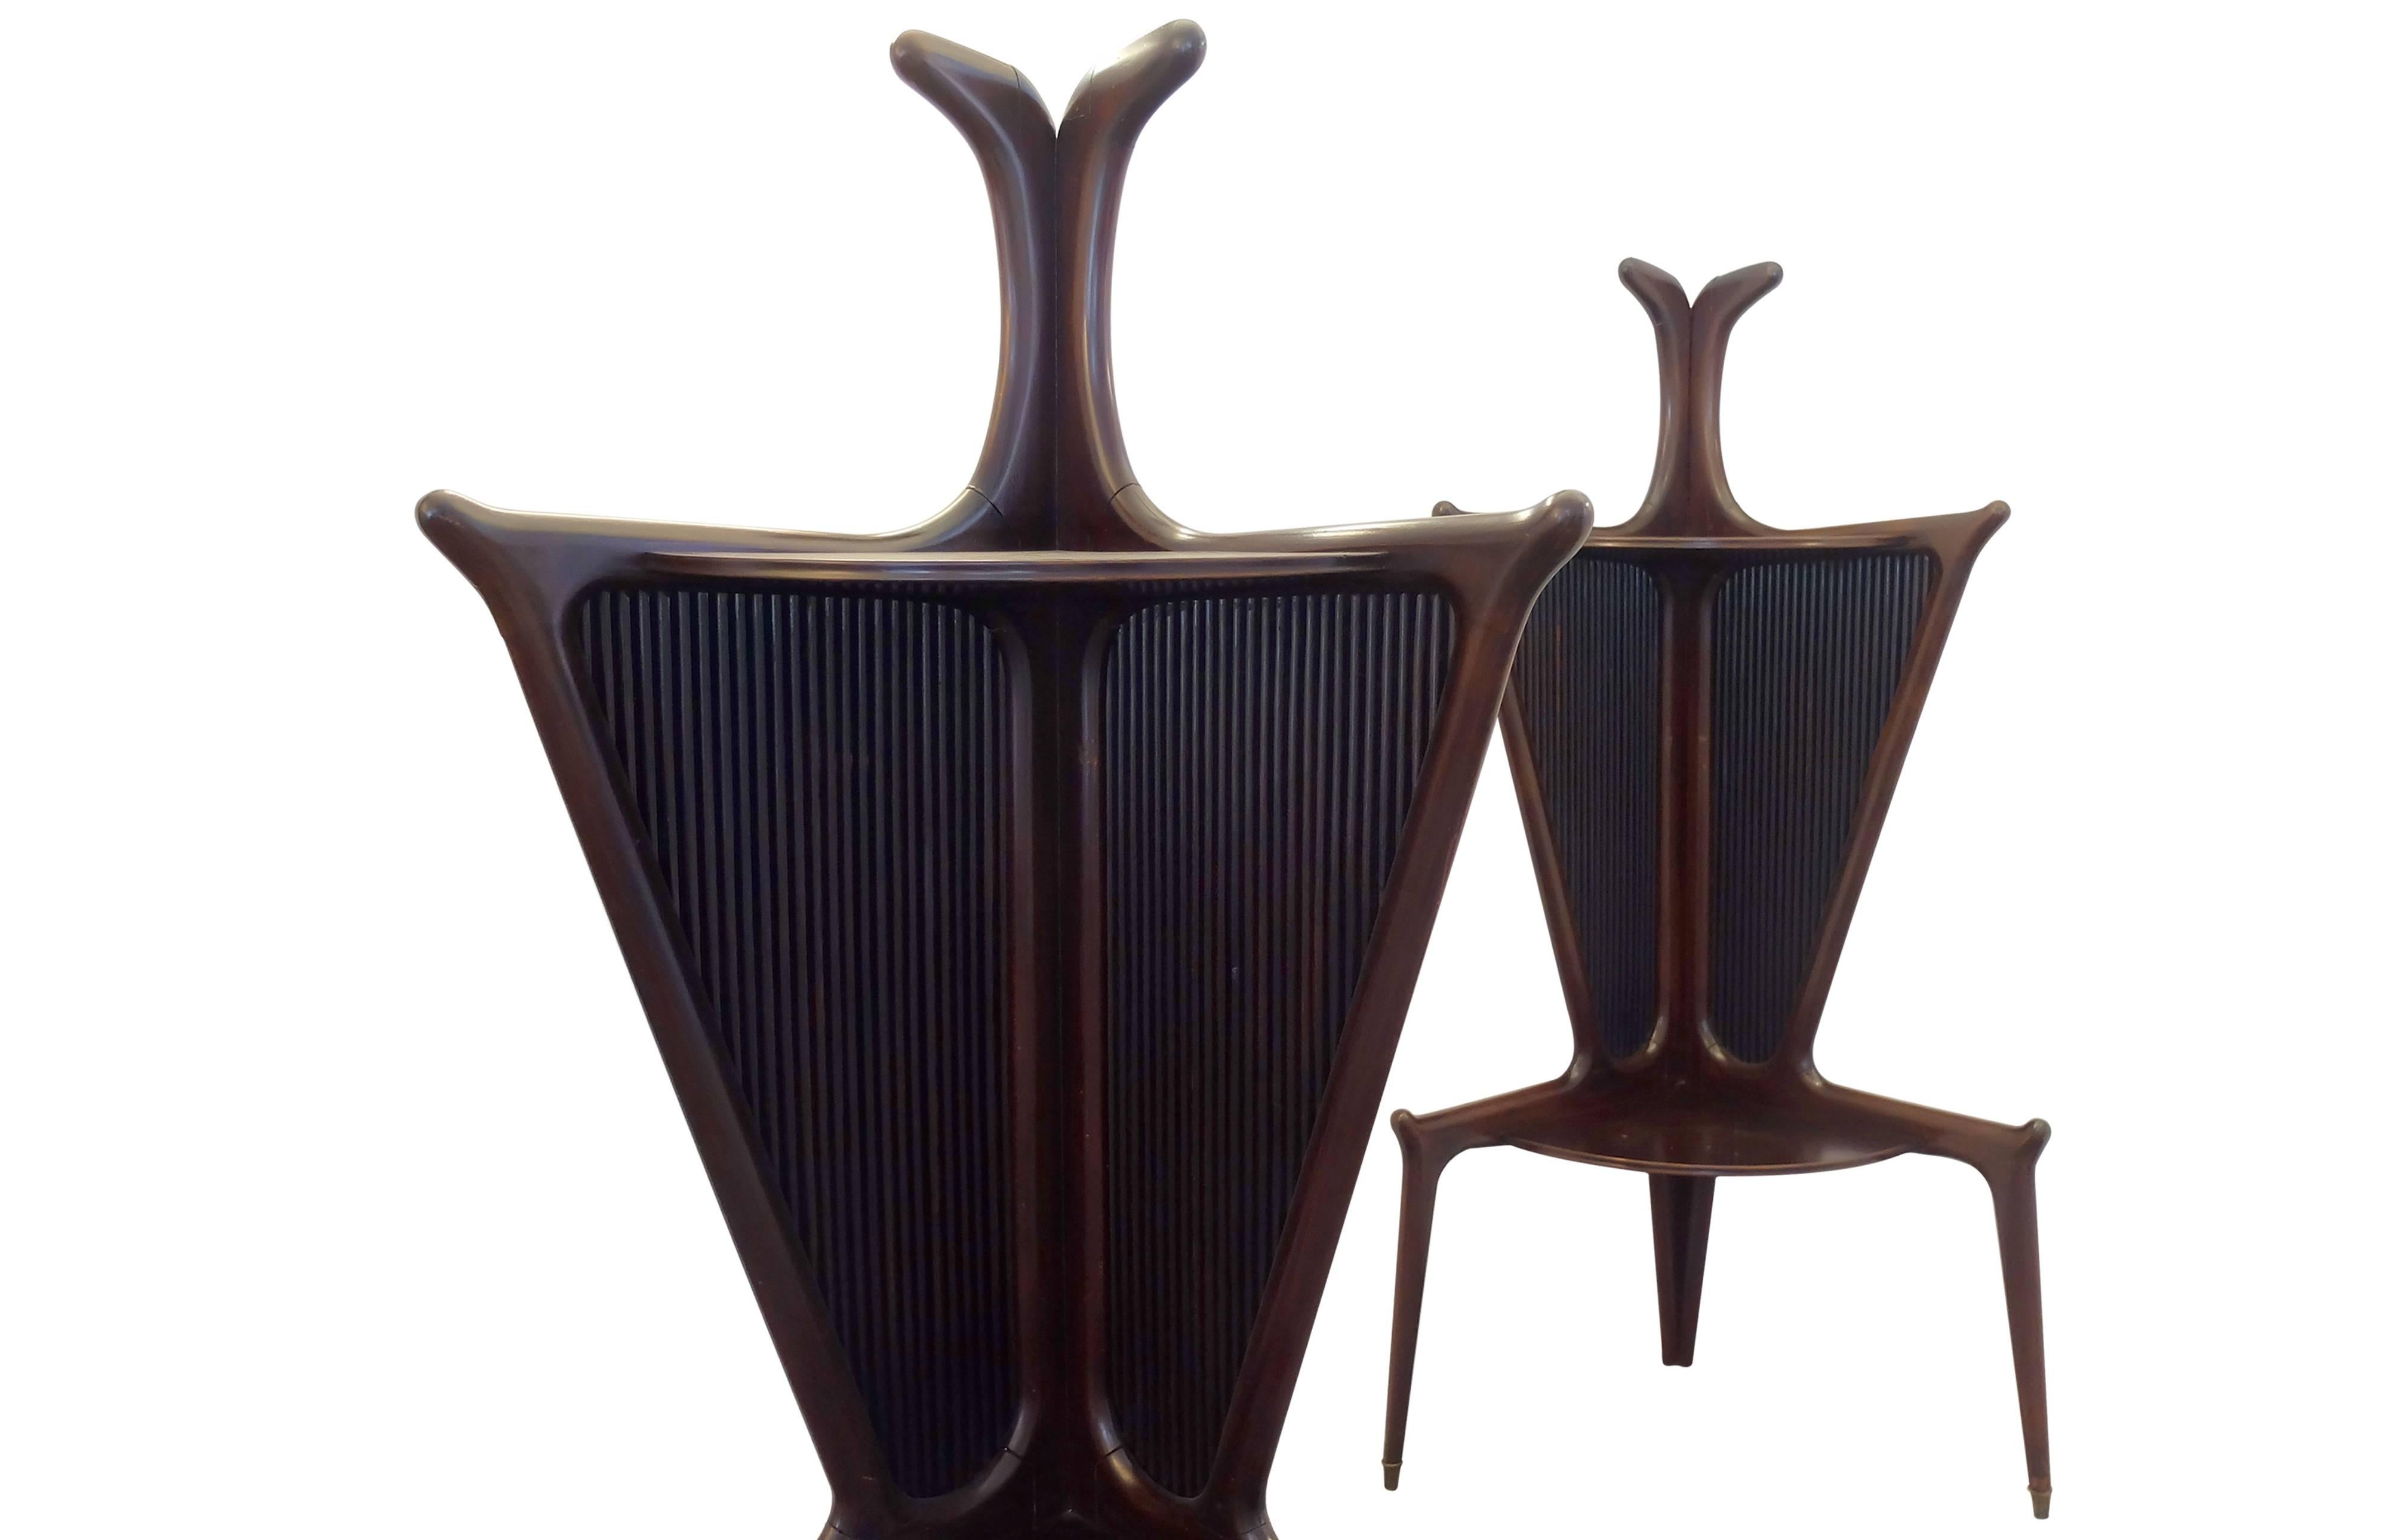 Formed out of lush polished dark rosewood, two stately corner tables of Italian origin from the 1950s, attributed to Pietro Chiesa.

The lean structure opens out into two leaves with a ribbed geometrical pattern carved into the surface, while an